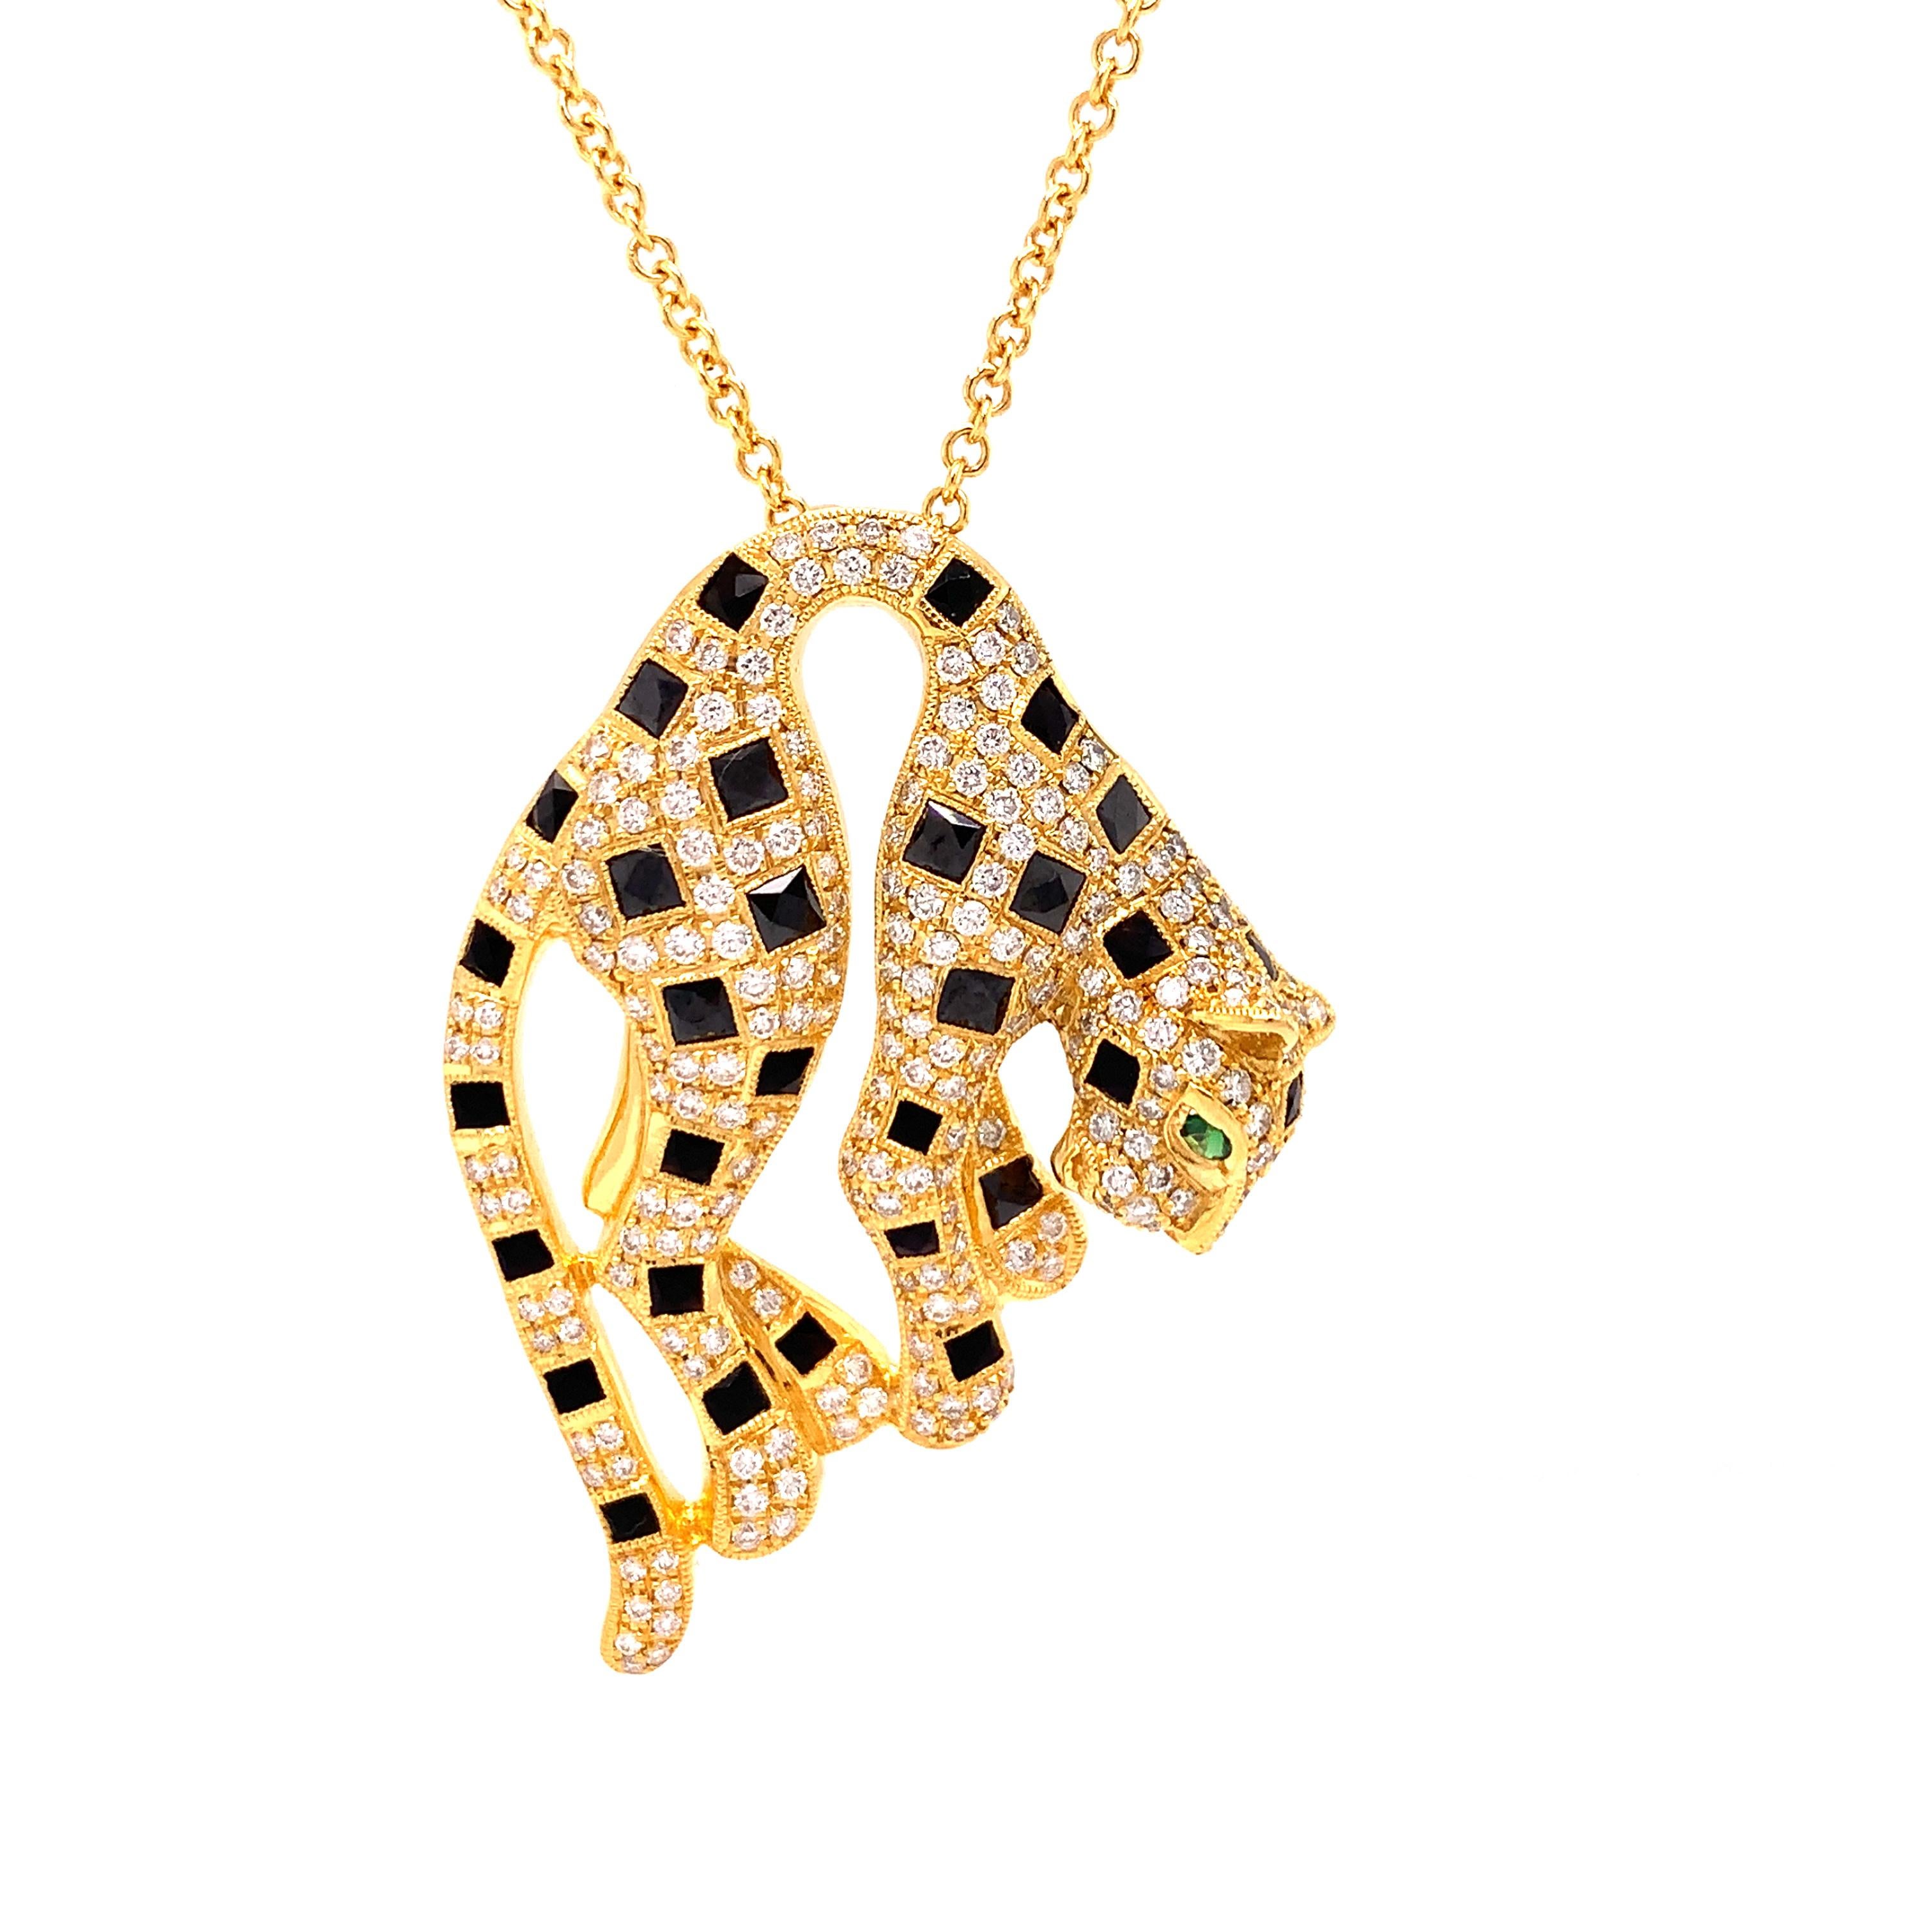 Be ready for compliments while wearing this iconic panther design. With 2.02 cttw of G-H color and VS1-SI1 clarity diamonds, this classic necklace will catch the eye. Accented with .80 cttw of custom cut onyx and a .05 ct tsavorite for the panthers